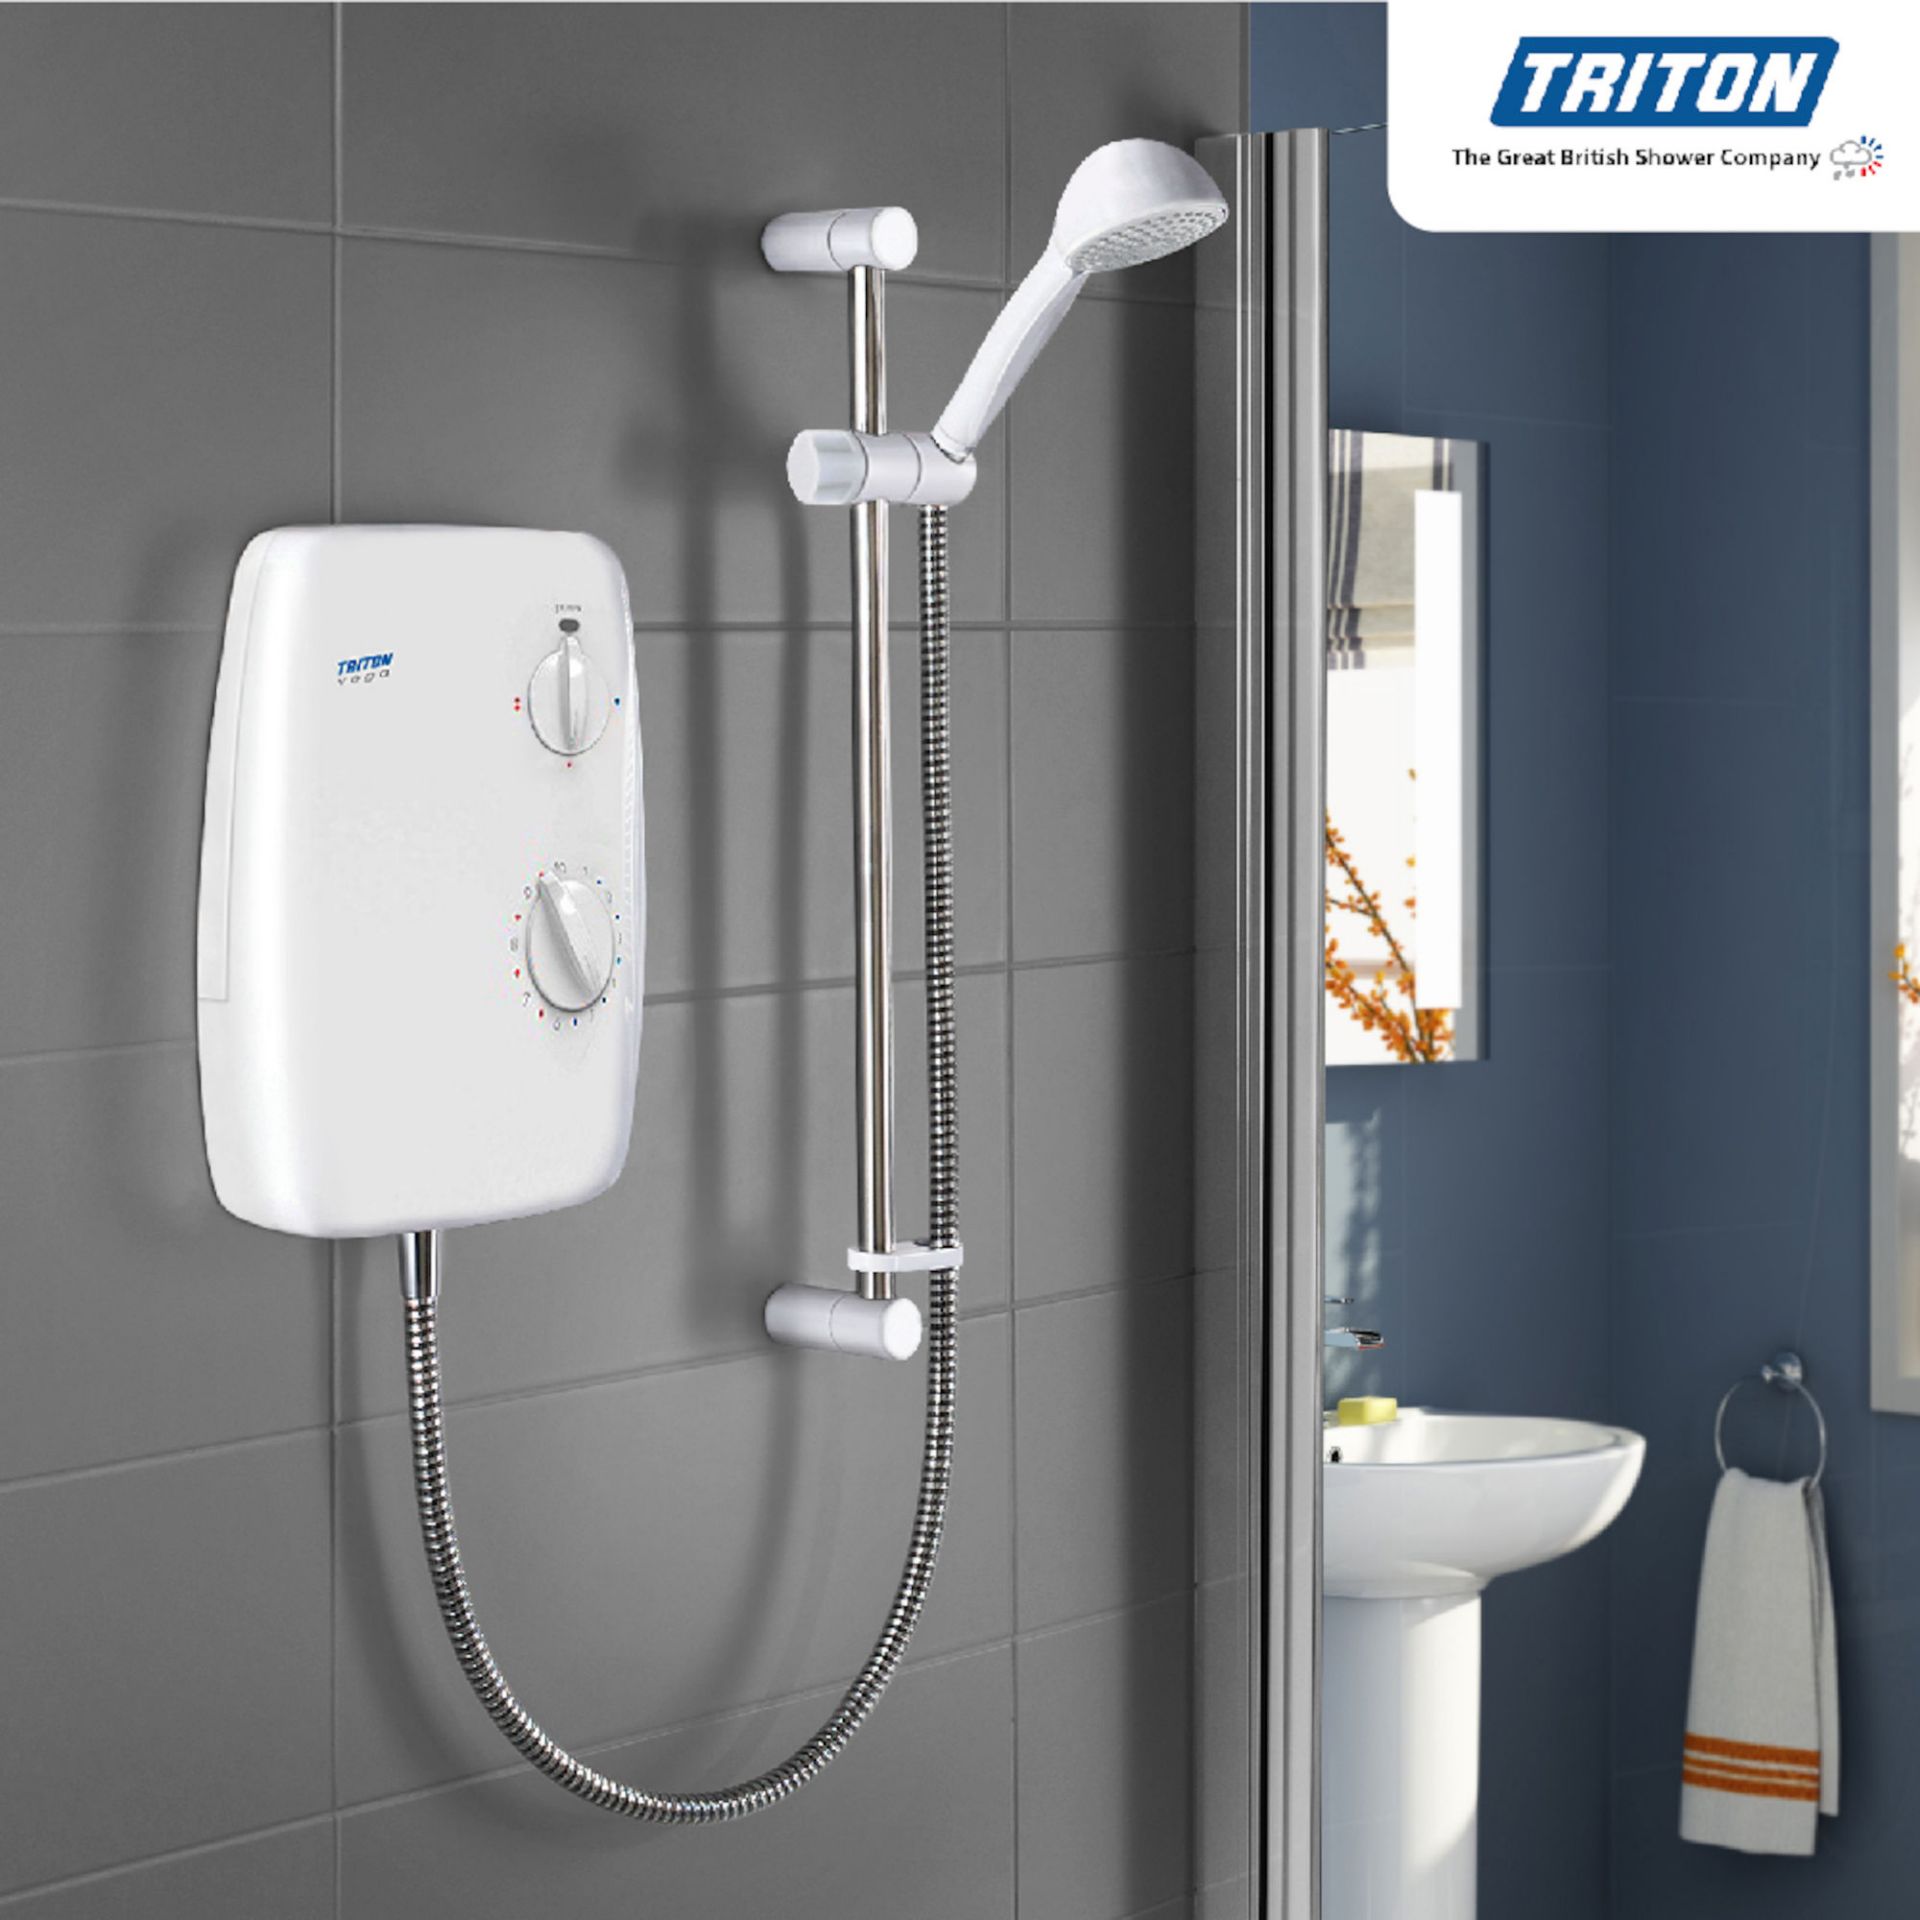 (A213) 8.5kW Triton Vega Electric Shower. RRP £529.99. Compatible with virtually any household...